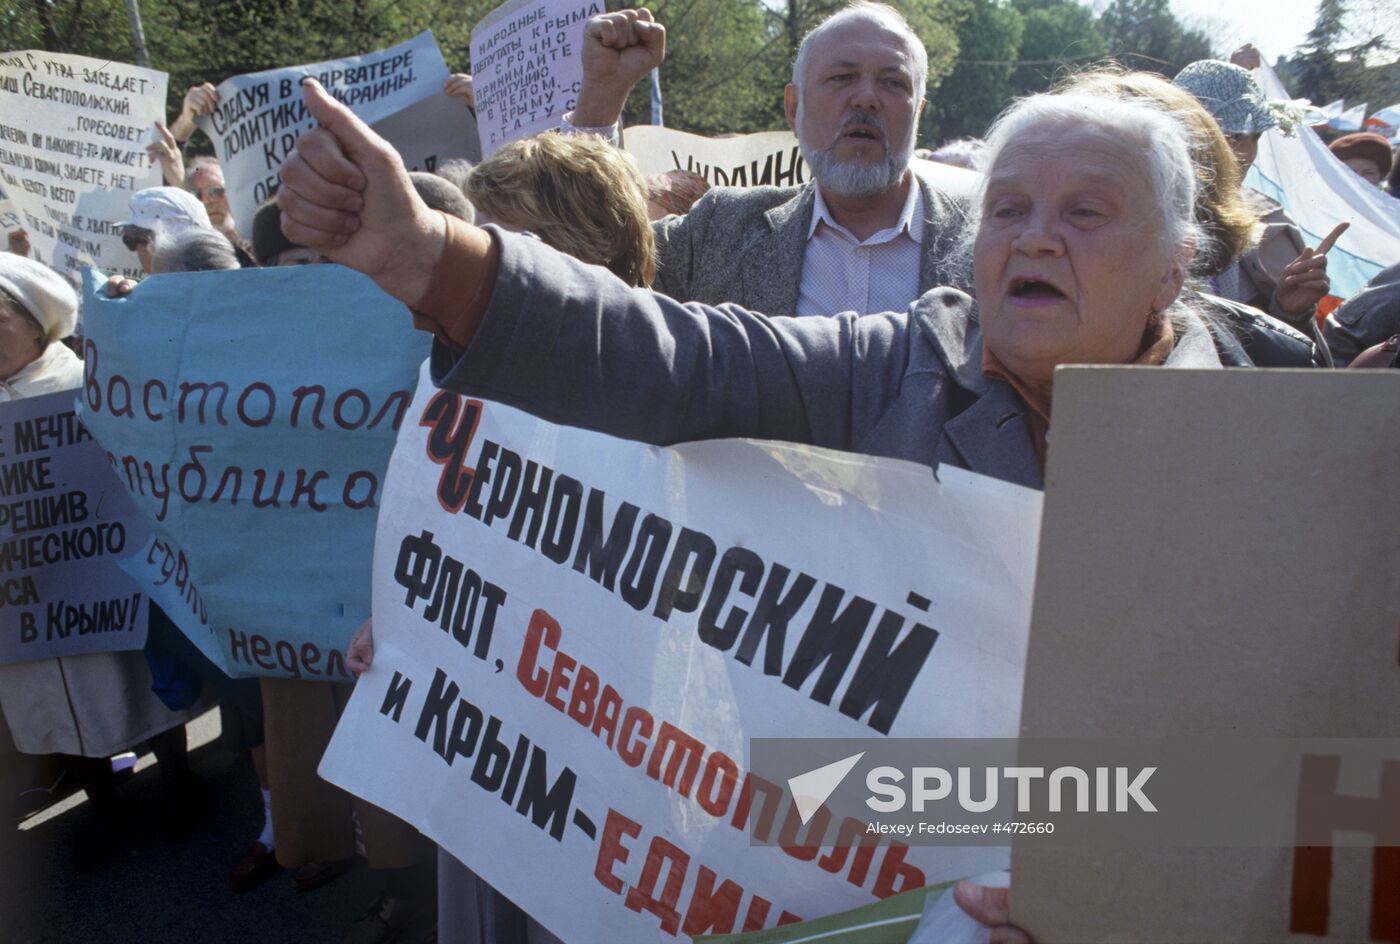 Rally in support of Crimea independence referendum